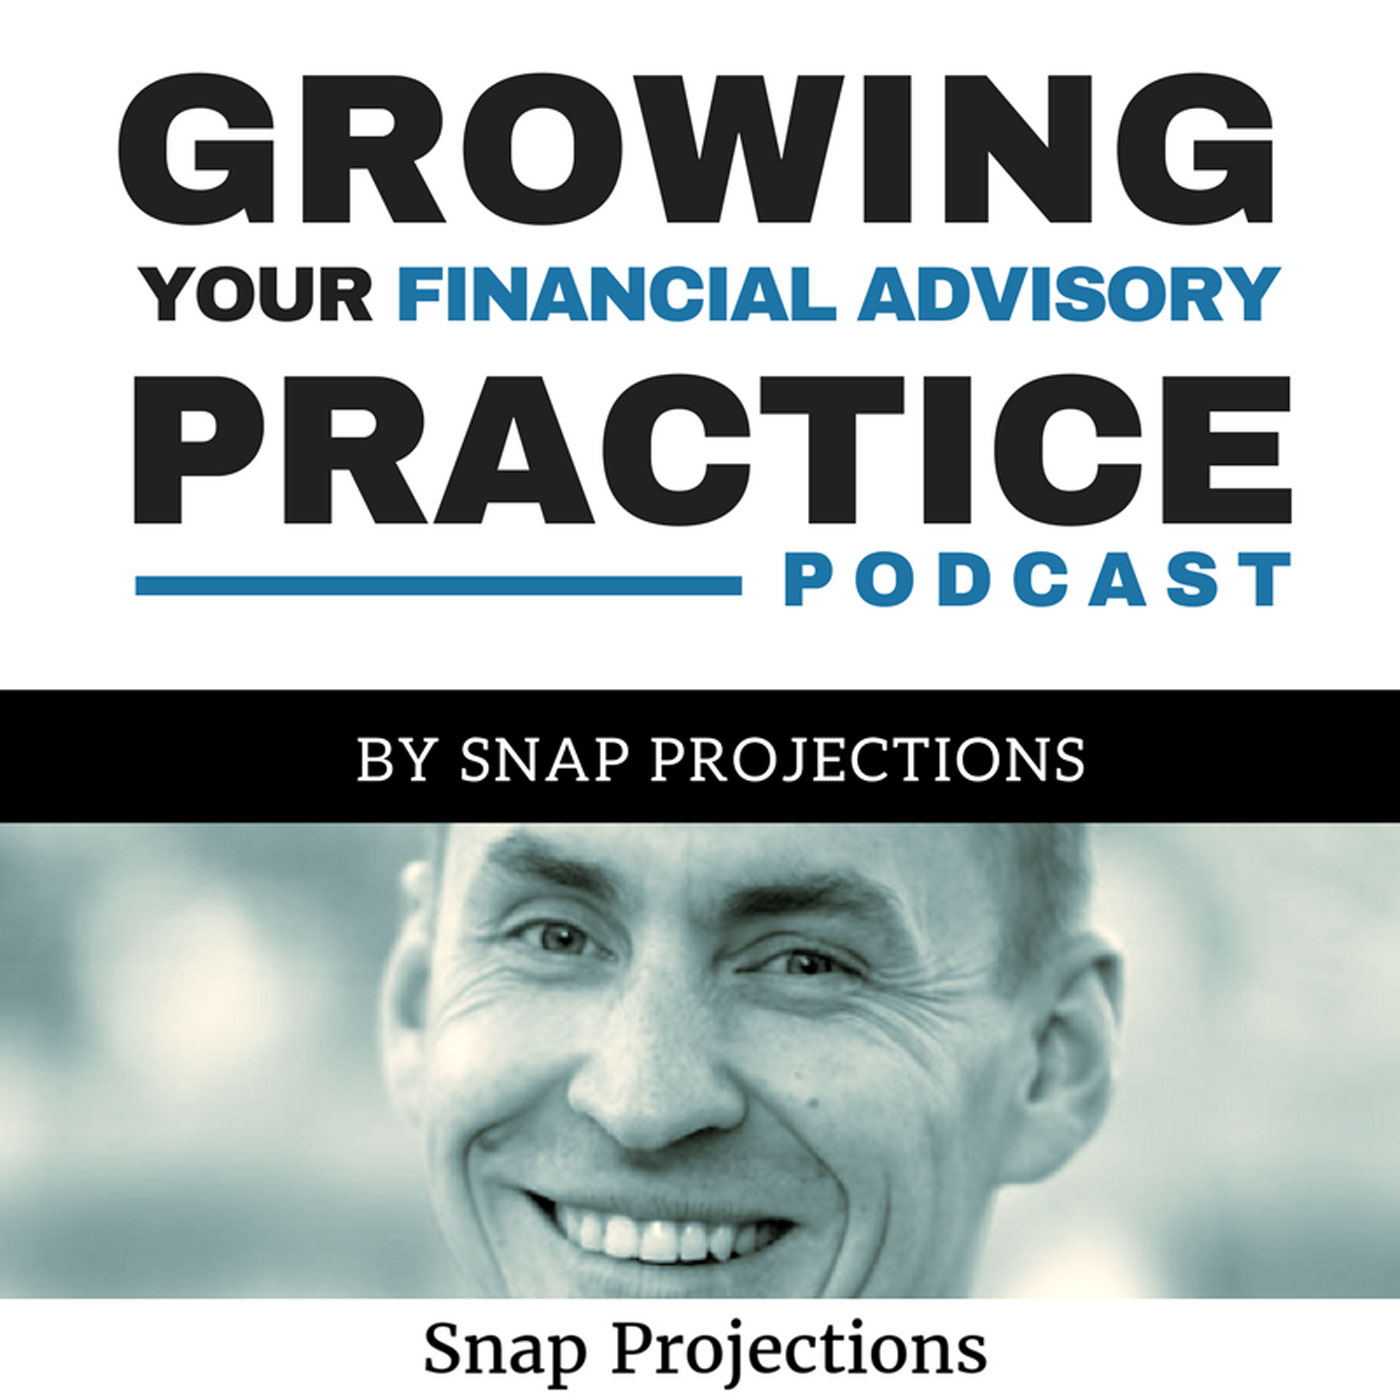 043: Life-first Financial Planning Helping Clients Look at the Big Picture